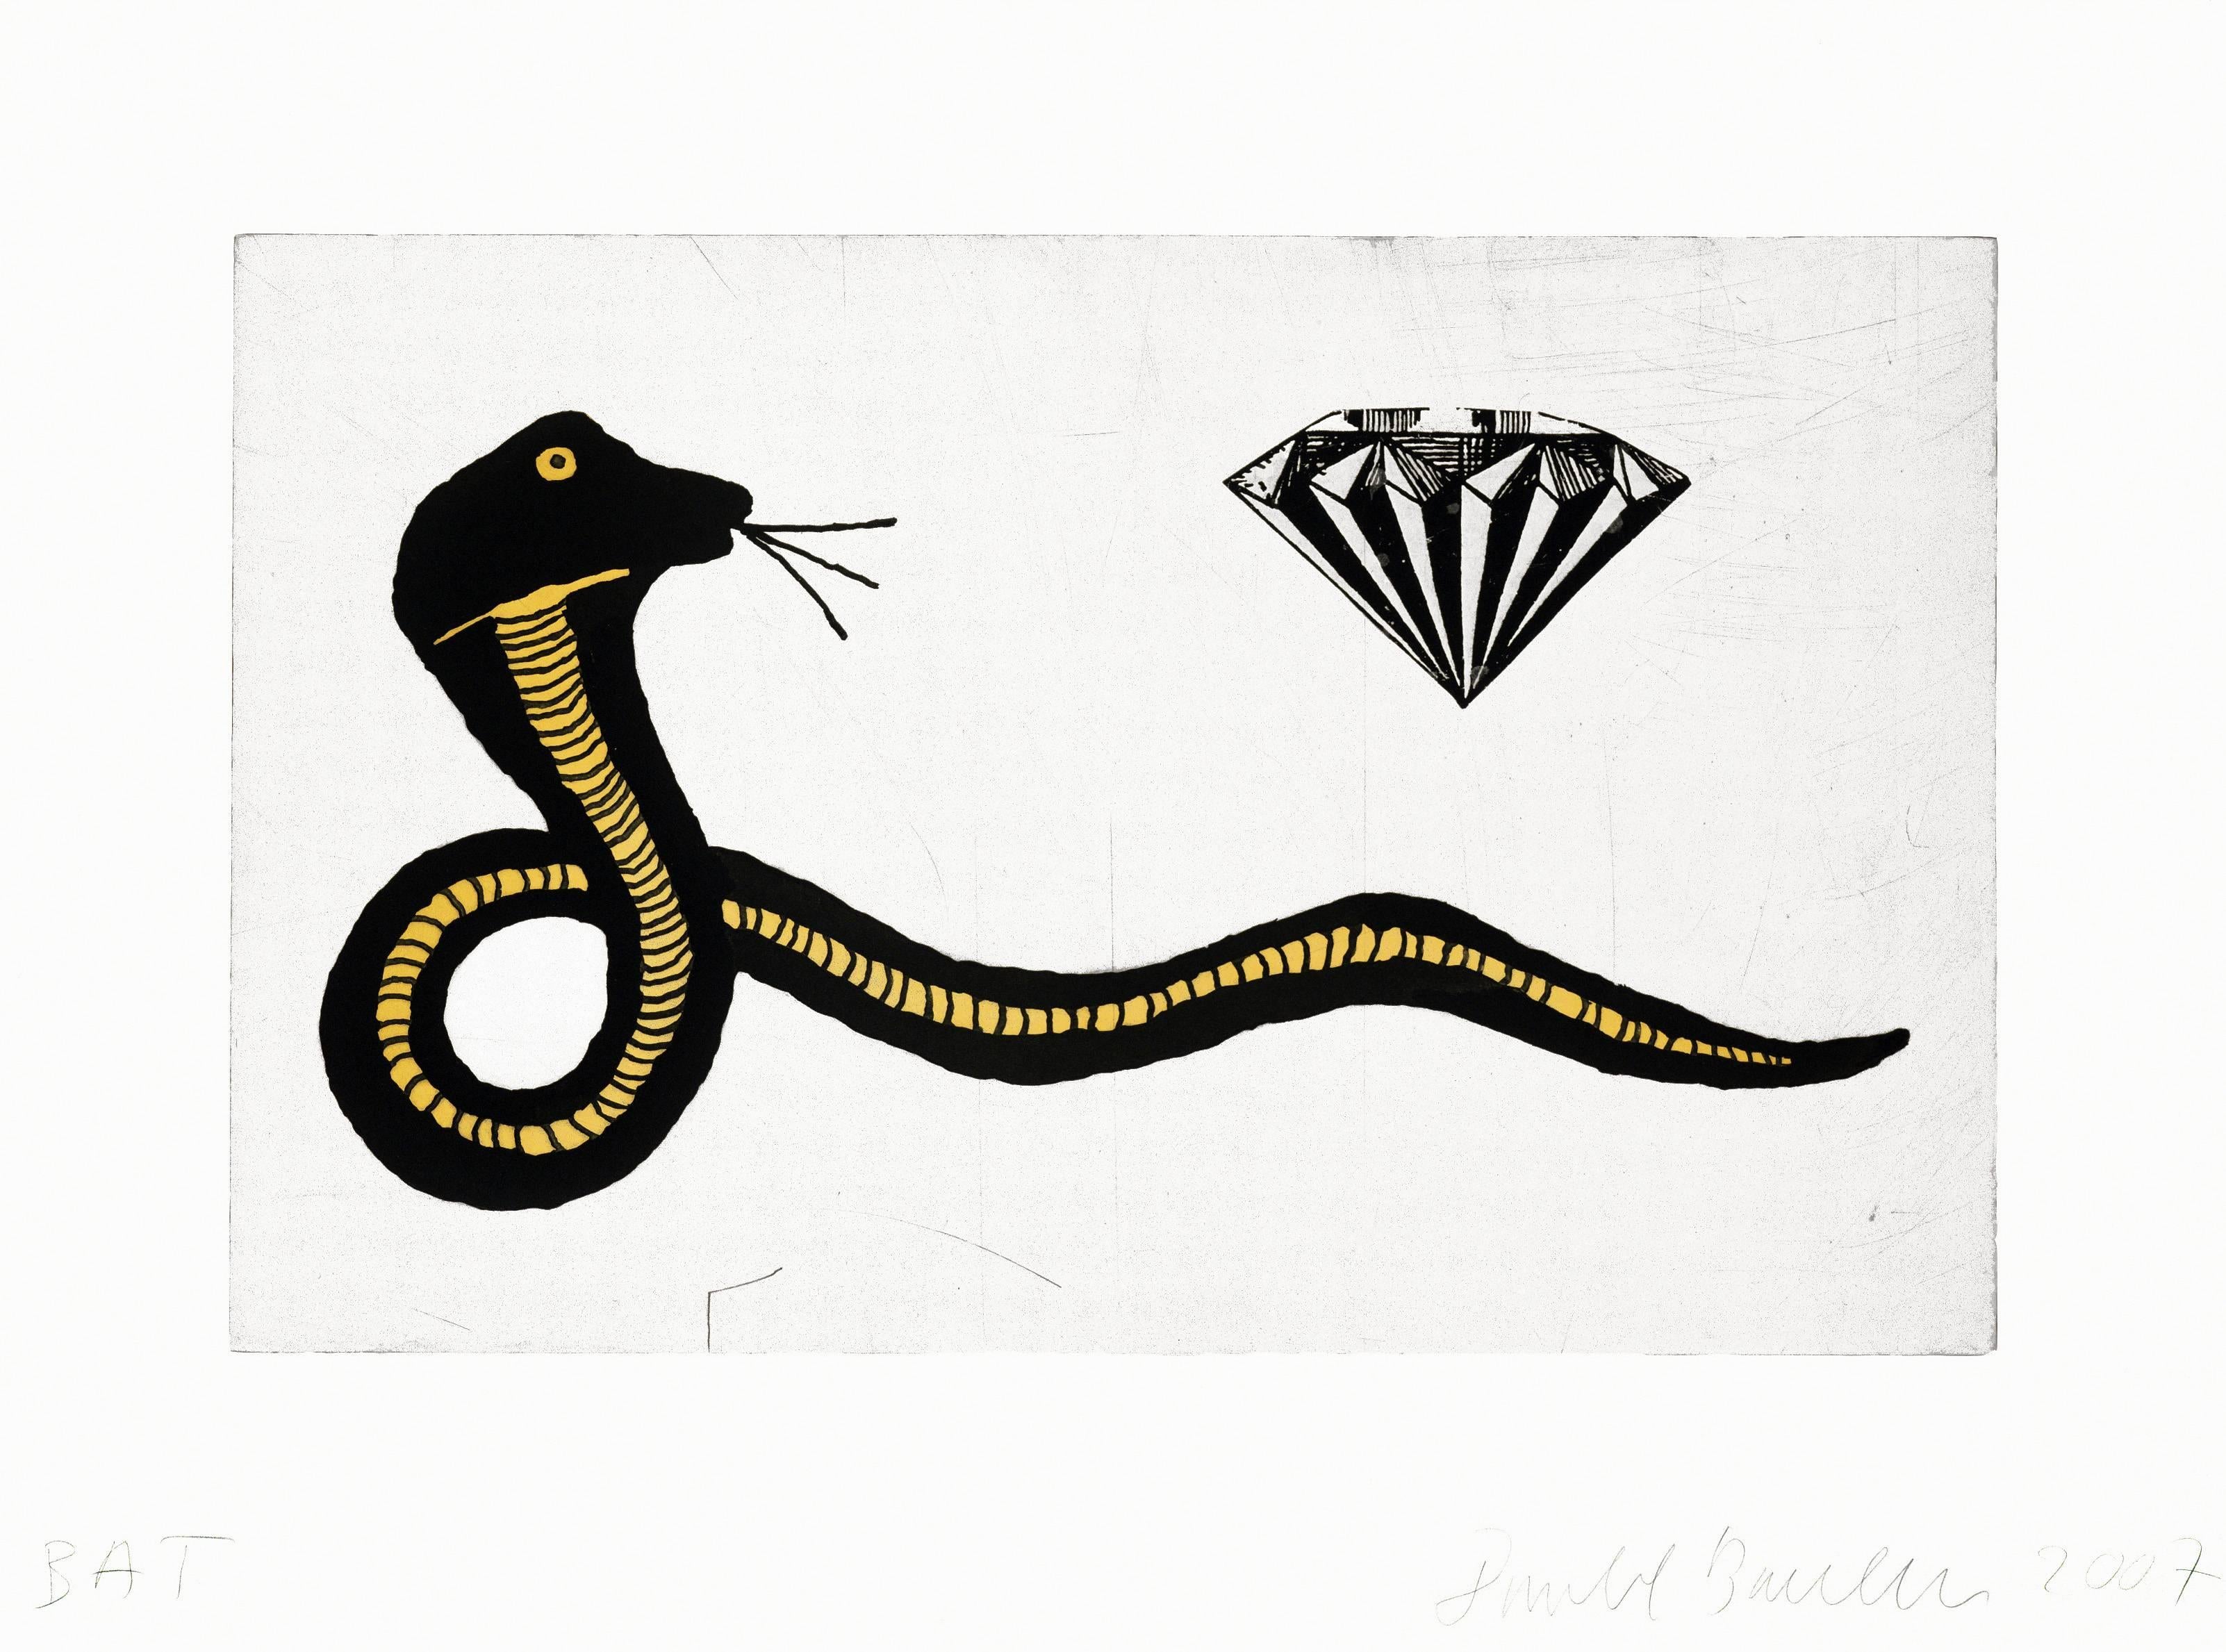 Donald Baechler 
Cooler than cool... Baechler's Diamond Snake 2007 was inspired by snake shrines of rural Rajasthan where the cobra is worshipped.

Aquatint and drypoint, photo-gravure printed on 300gsm Somerset paper
Plate size: 19 x 30 in. / 48.3